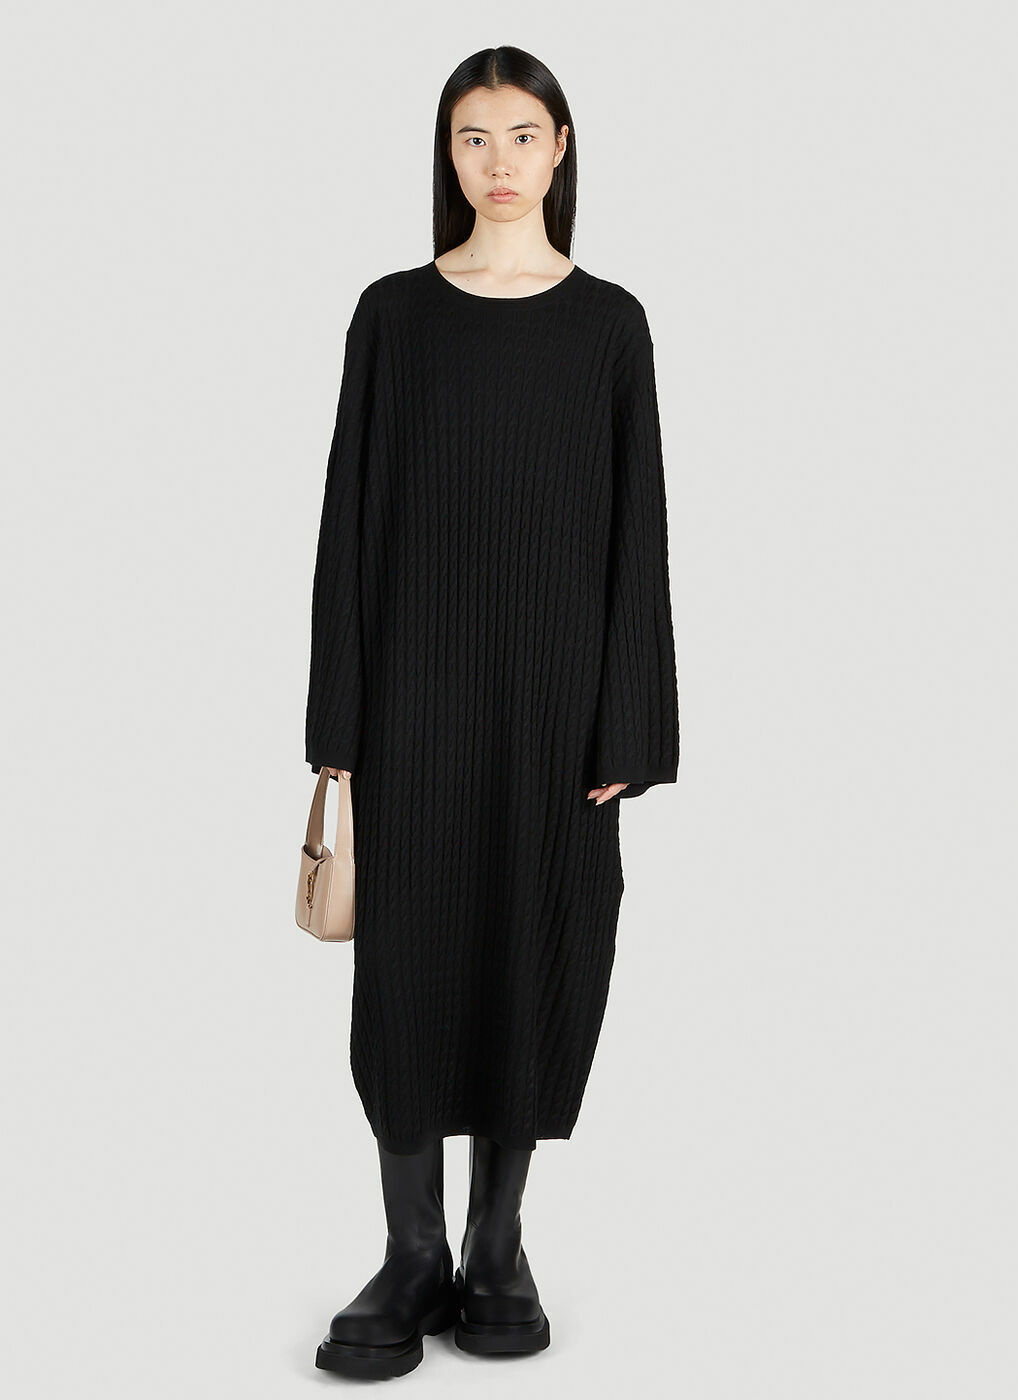 TOTEME Cable Knit Dress in Black Toteme